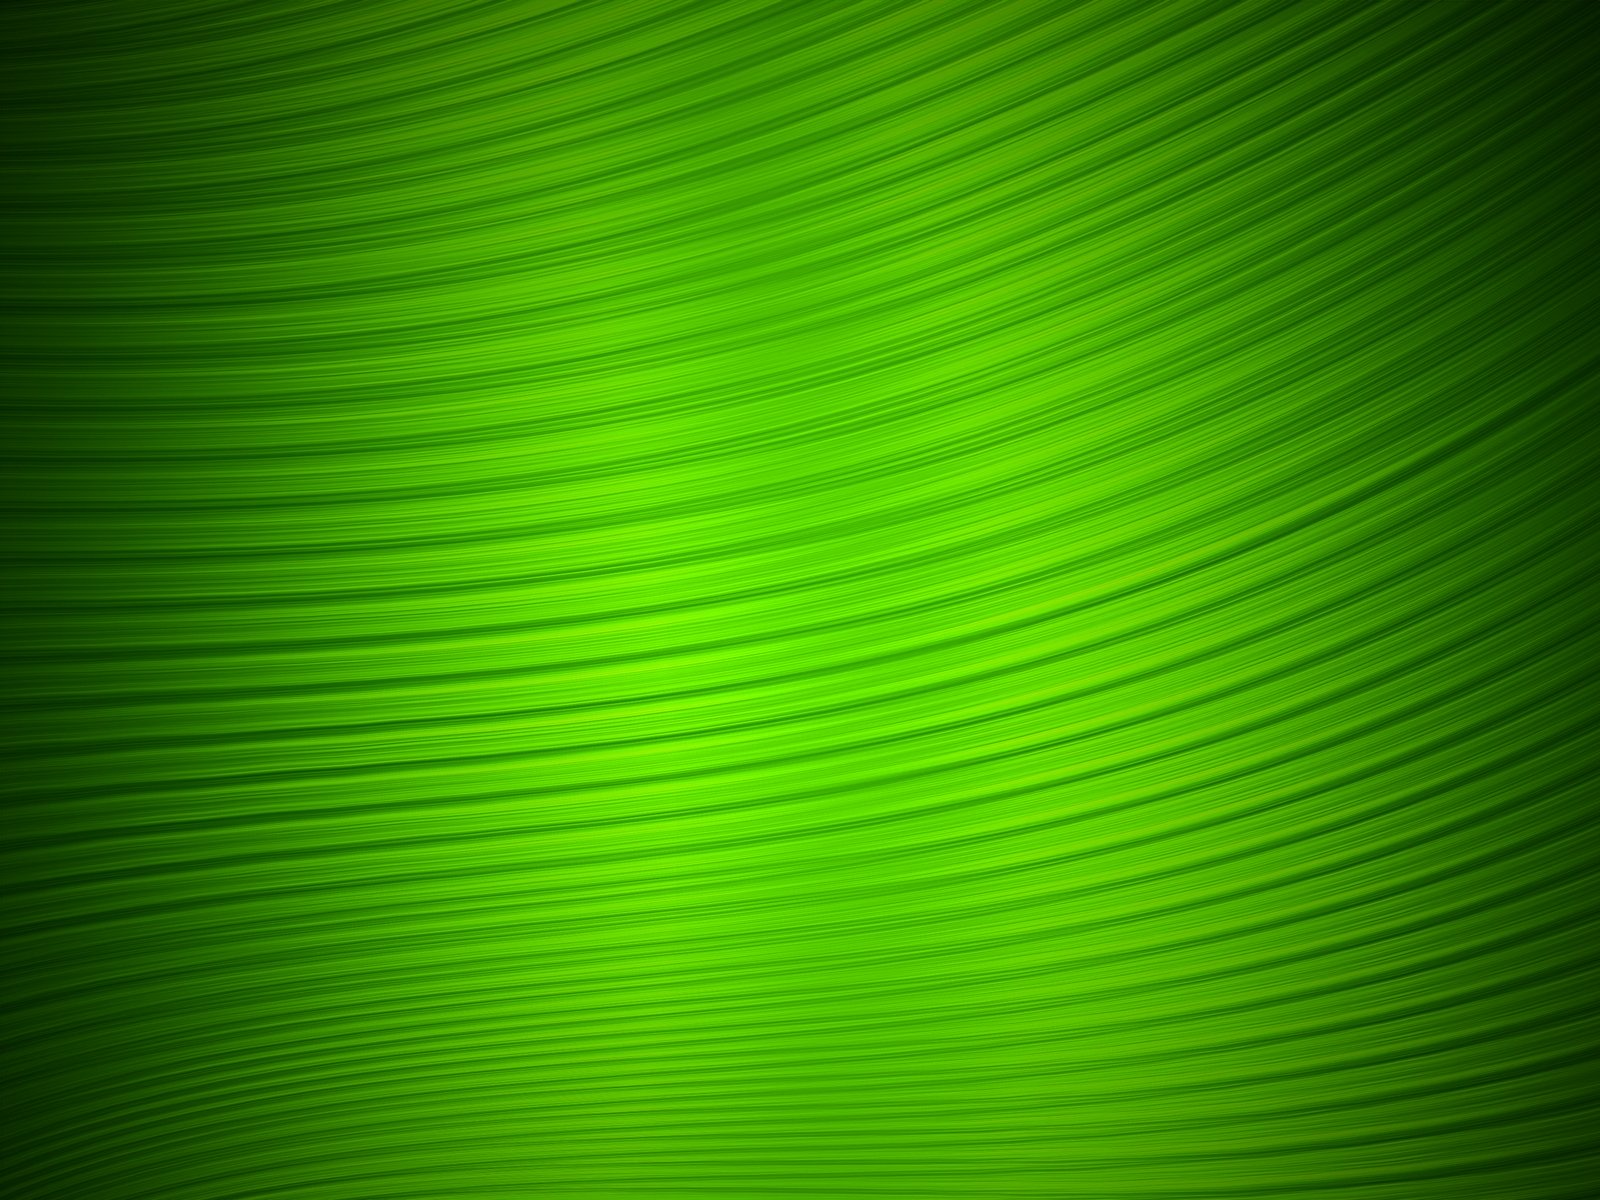 HD Green Wallpaper For Windows And Mac